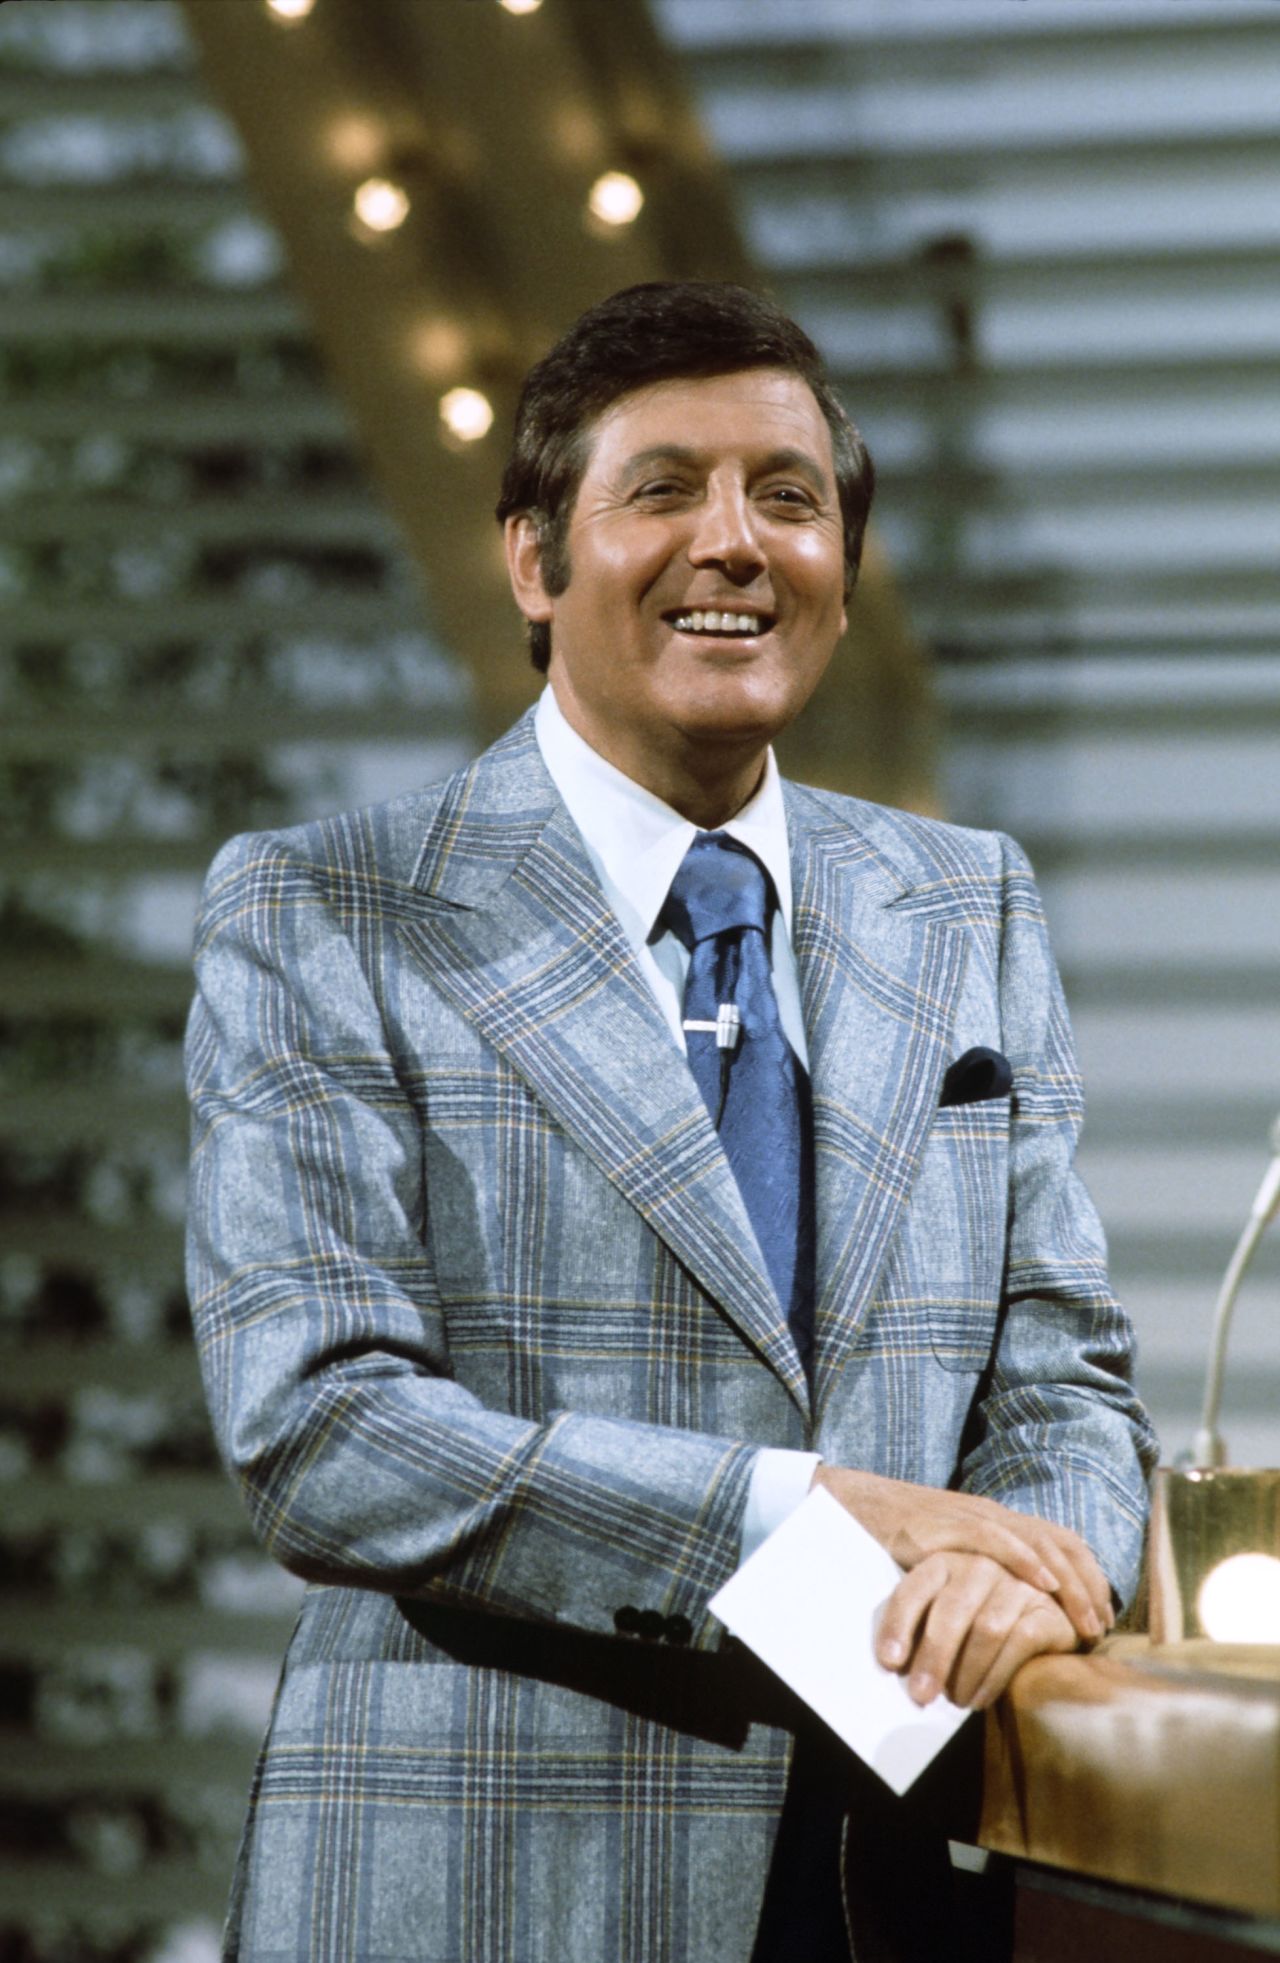 <a href="http://www.cnn.com/2017/09/30/tv-shows/monty-hall-dead-at-96/index.html" target="_blank">Monty Hall</a>, best known as the cheerful and friendly host of the game show "Let's Make a Deal," died September 30 in Los Angeles, his daughter Sharon Hall said. He was 96.